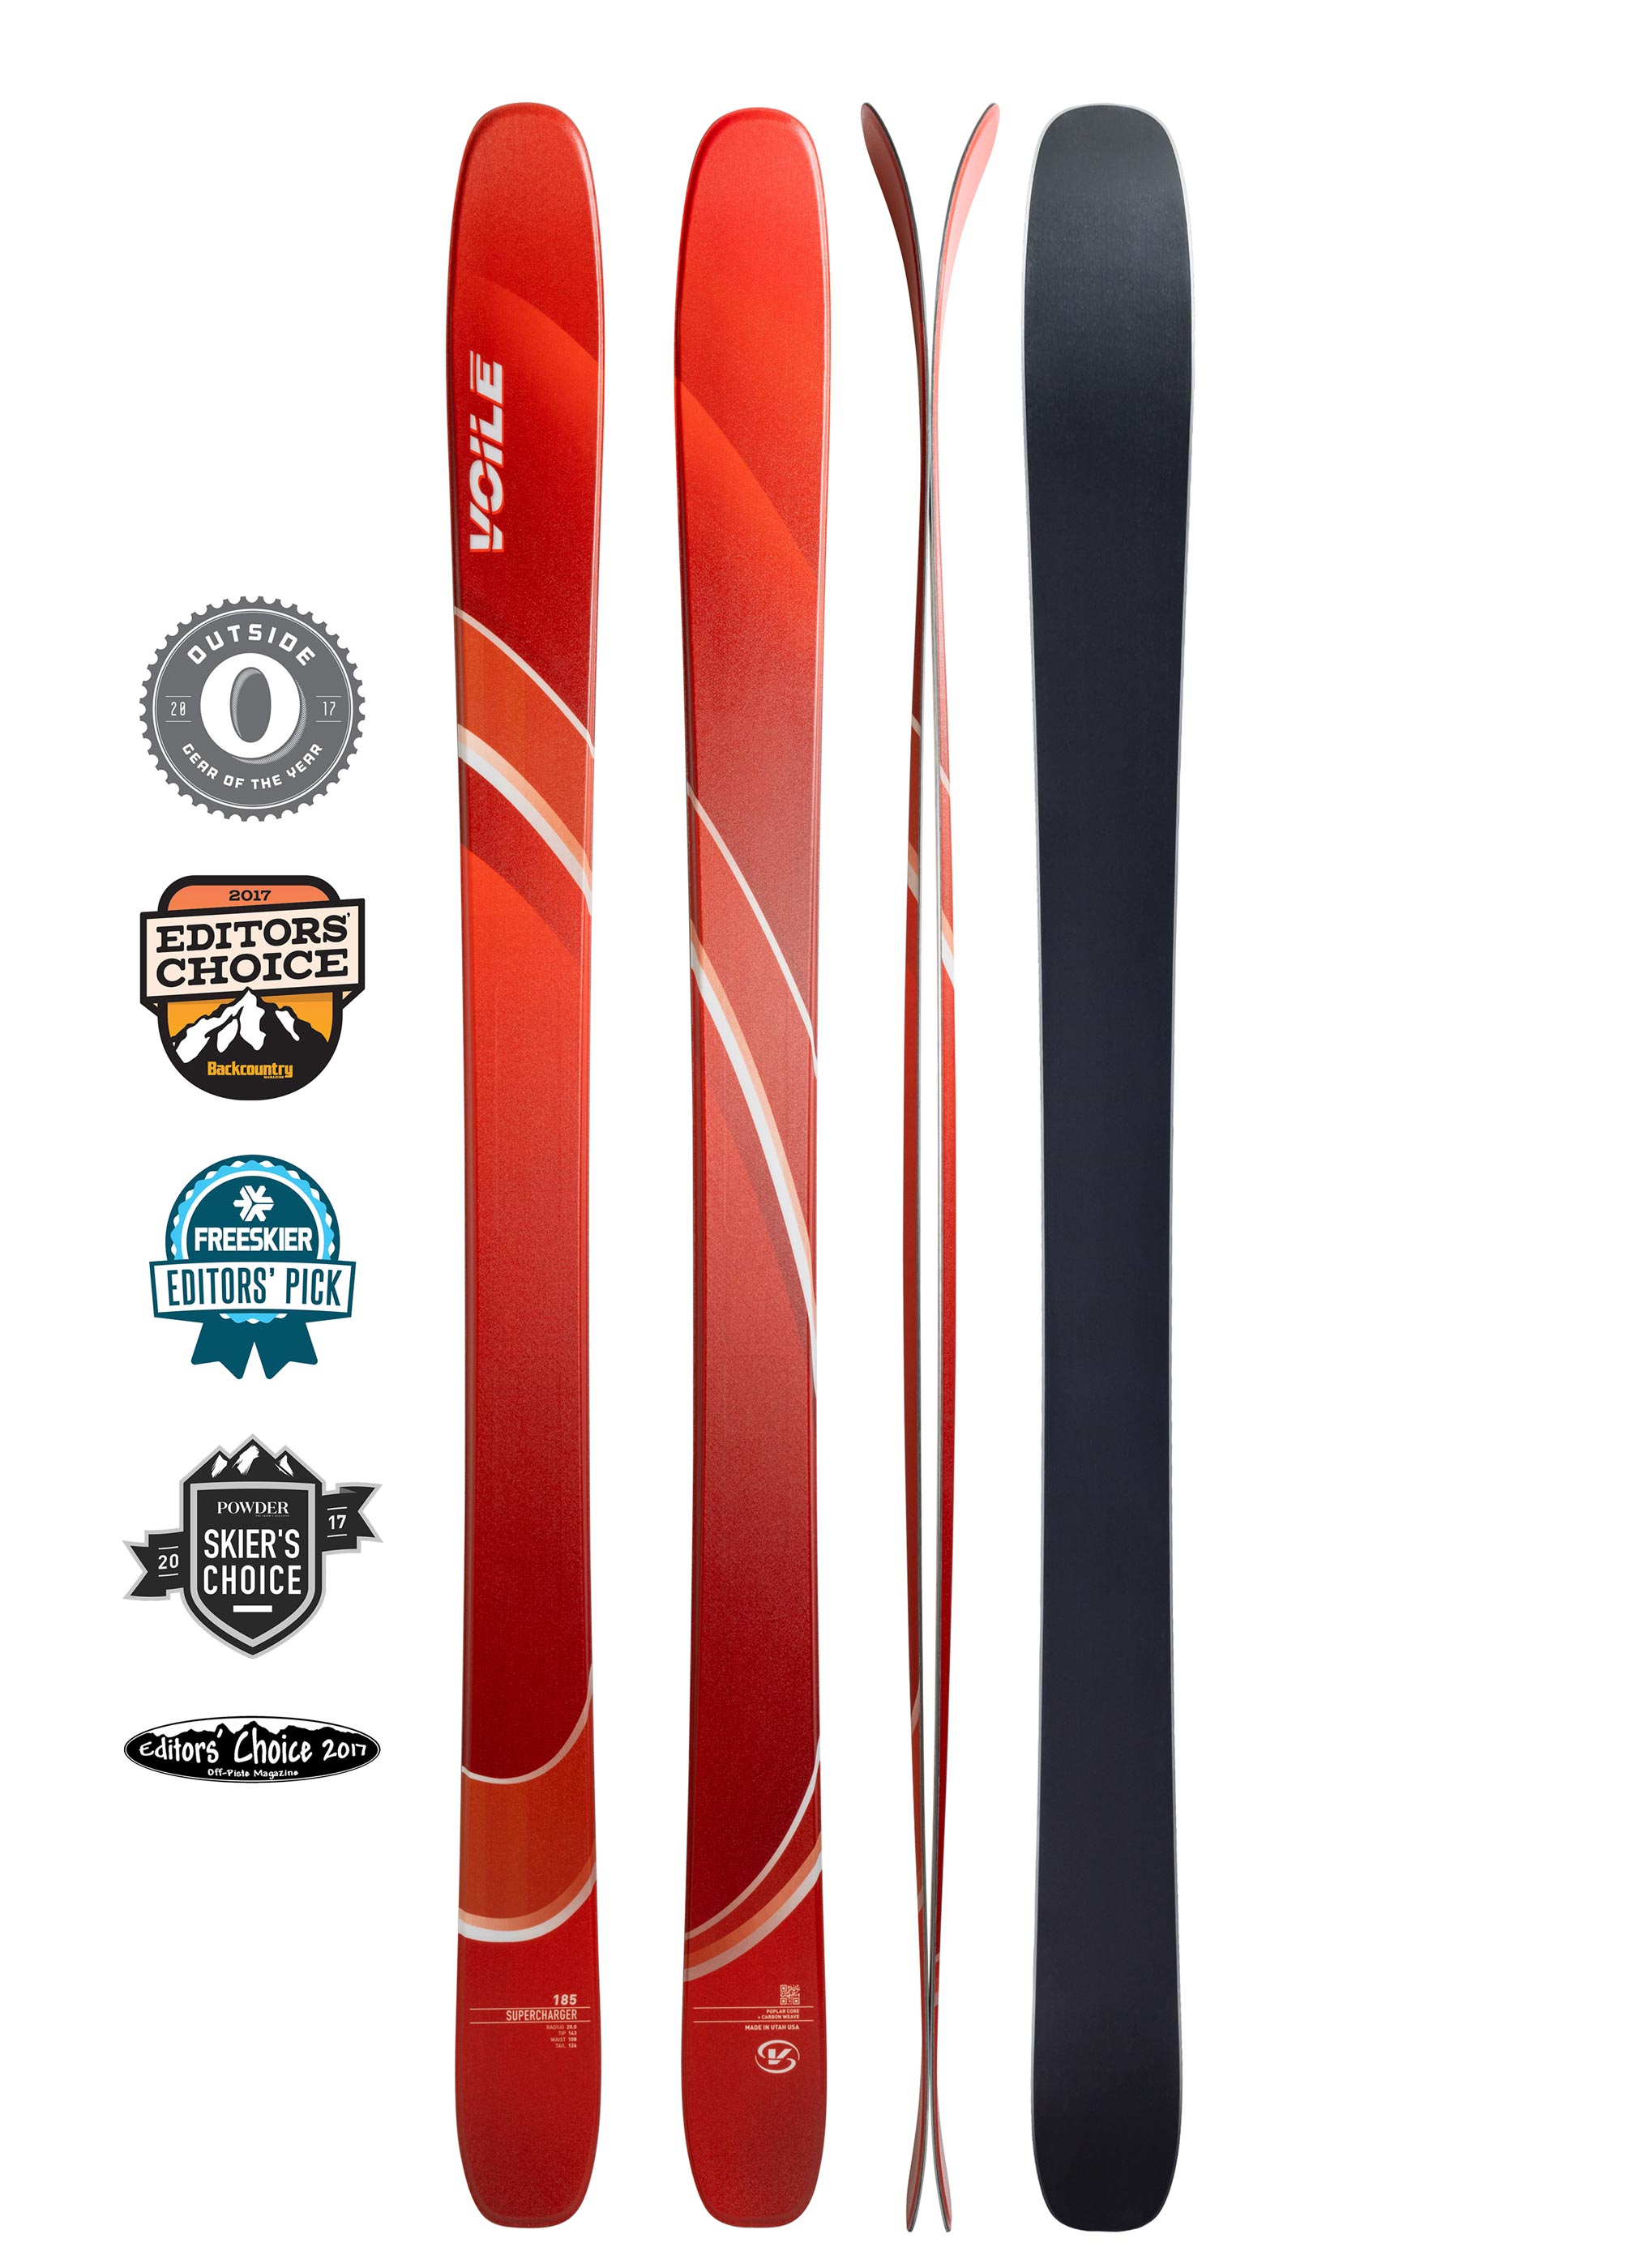 https://www.voile.com/mm5/graphics/00000001/2/voile-supercharger-skis-2324.jpg